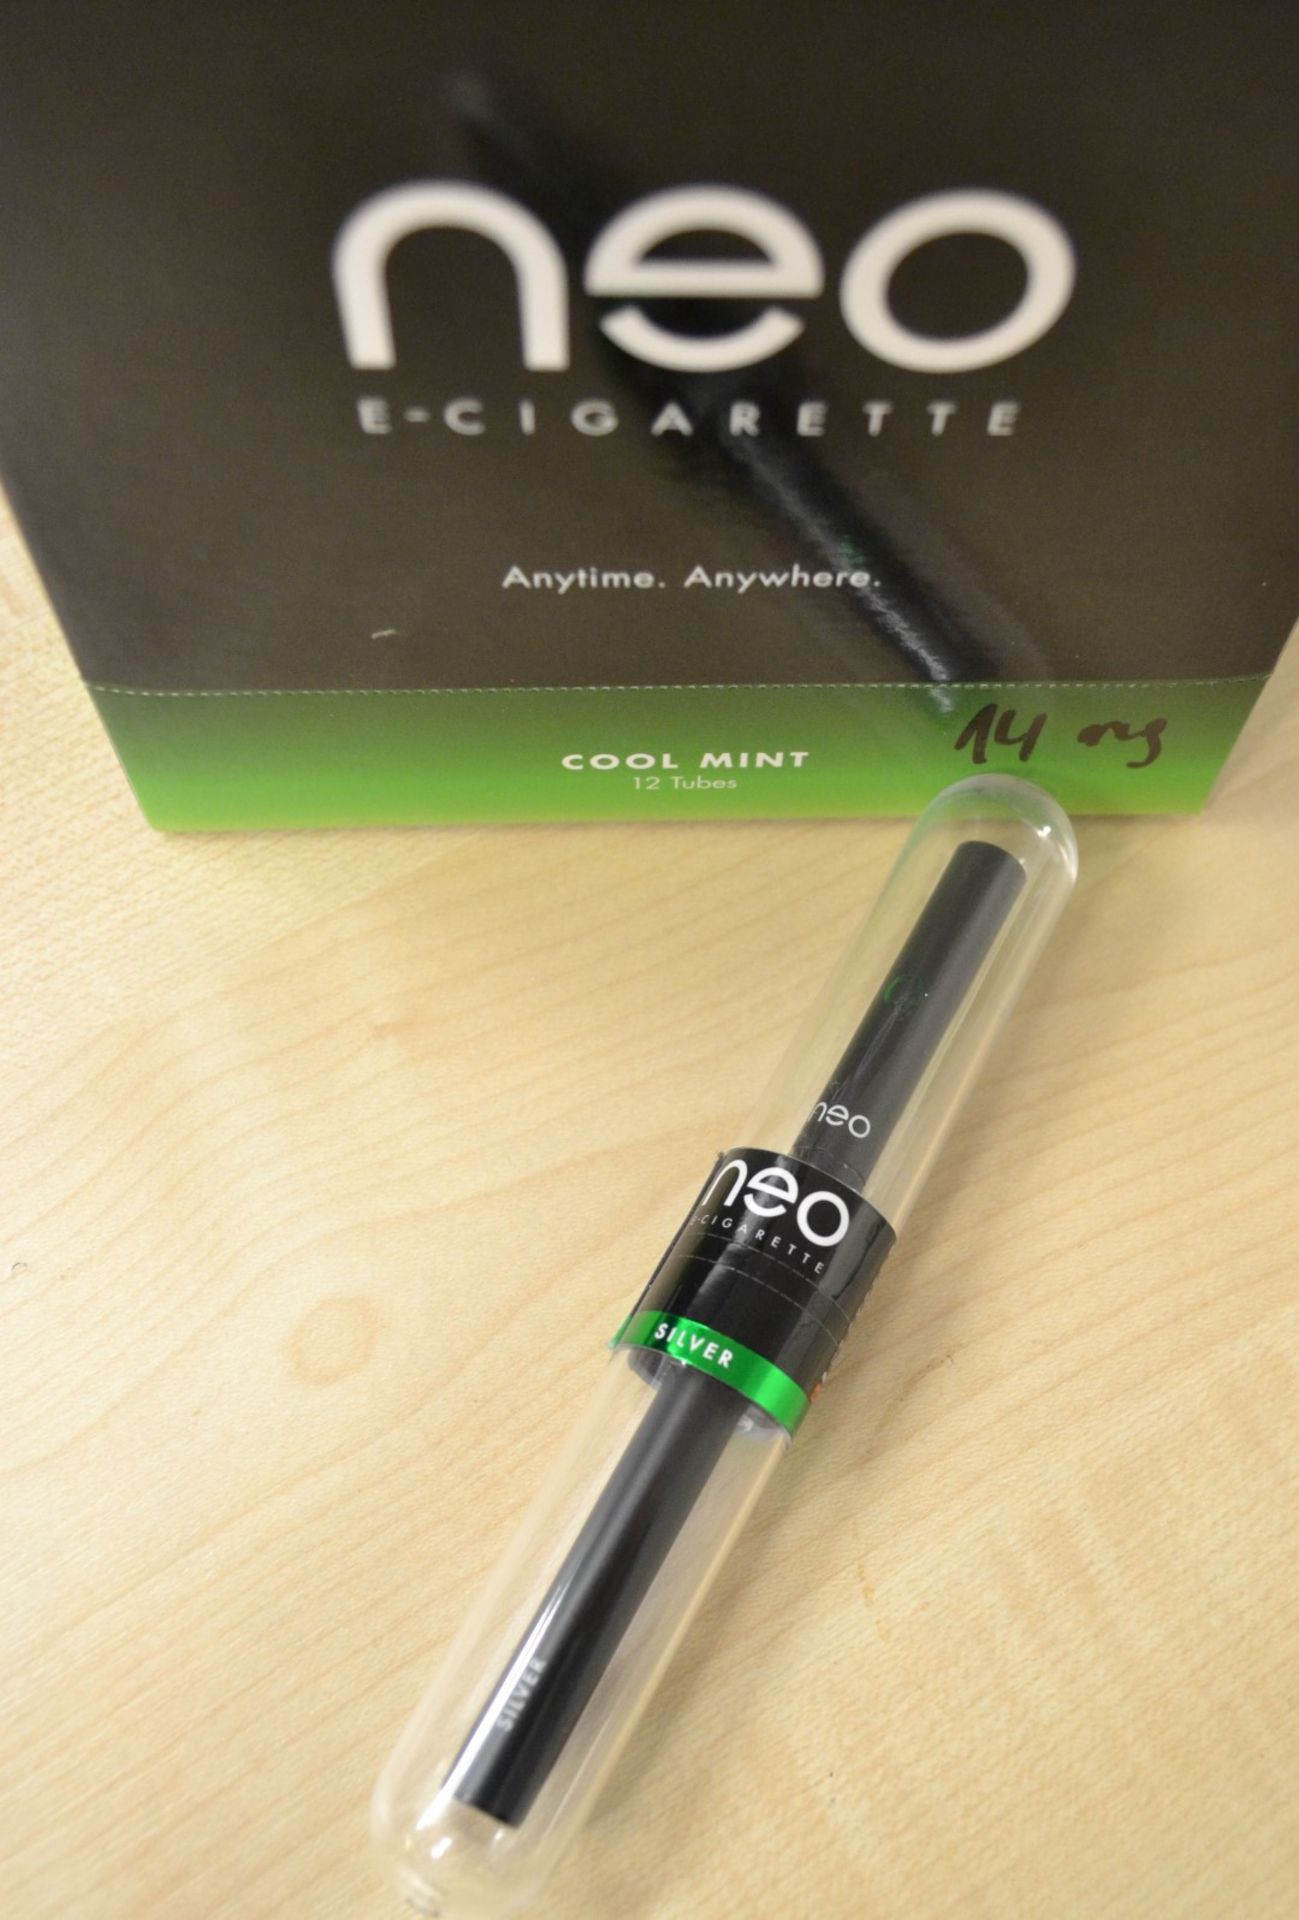 24 x Neo E-Cigarettes Cool Mint Disposable Electronic Cigarettes - New & Sealed Stock - CL185 - Ref: - Image 7 of 8